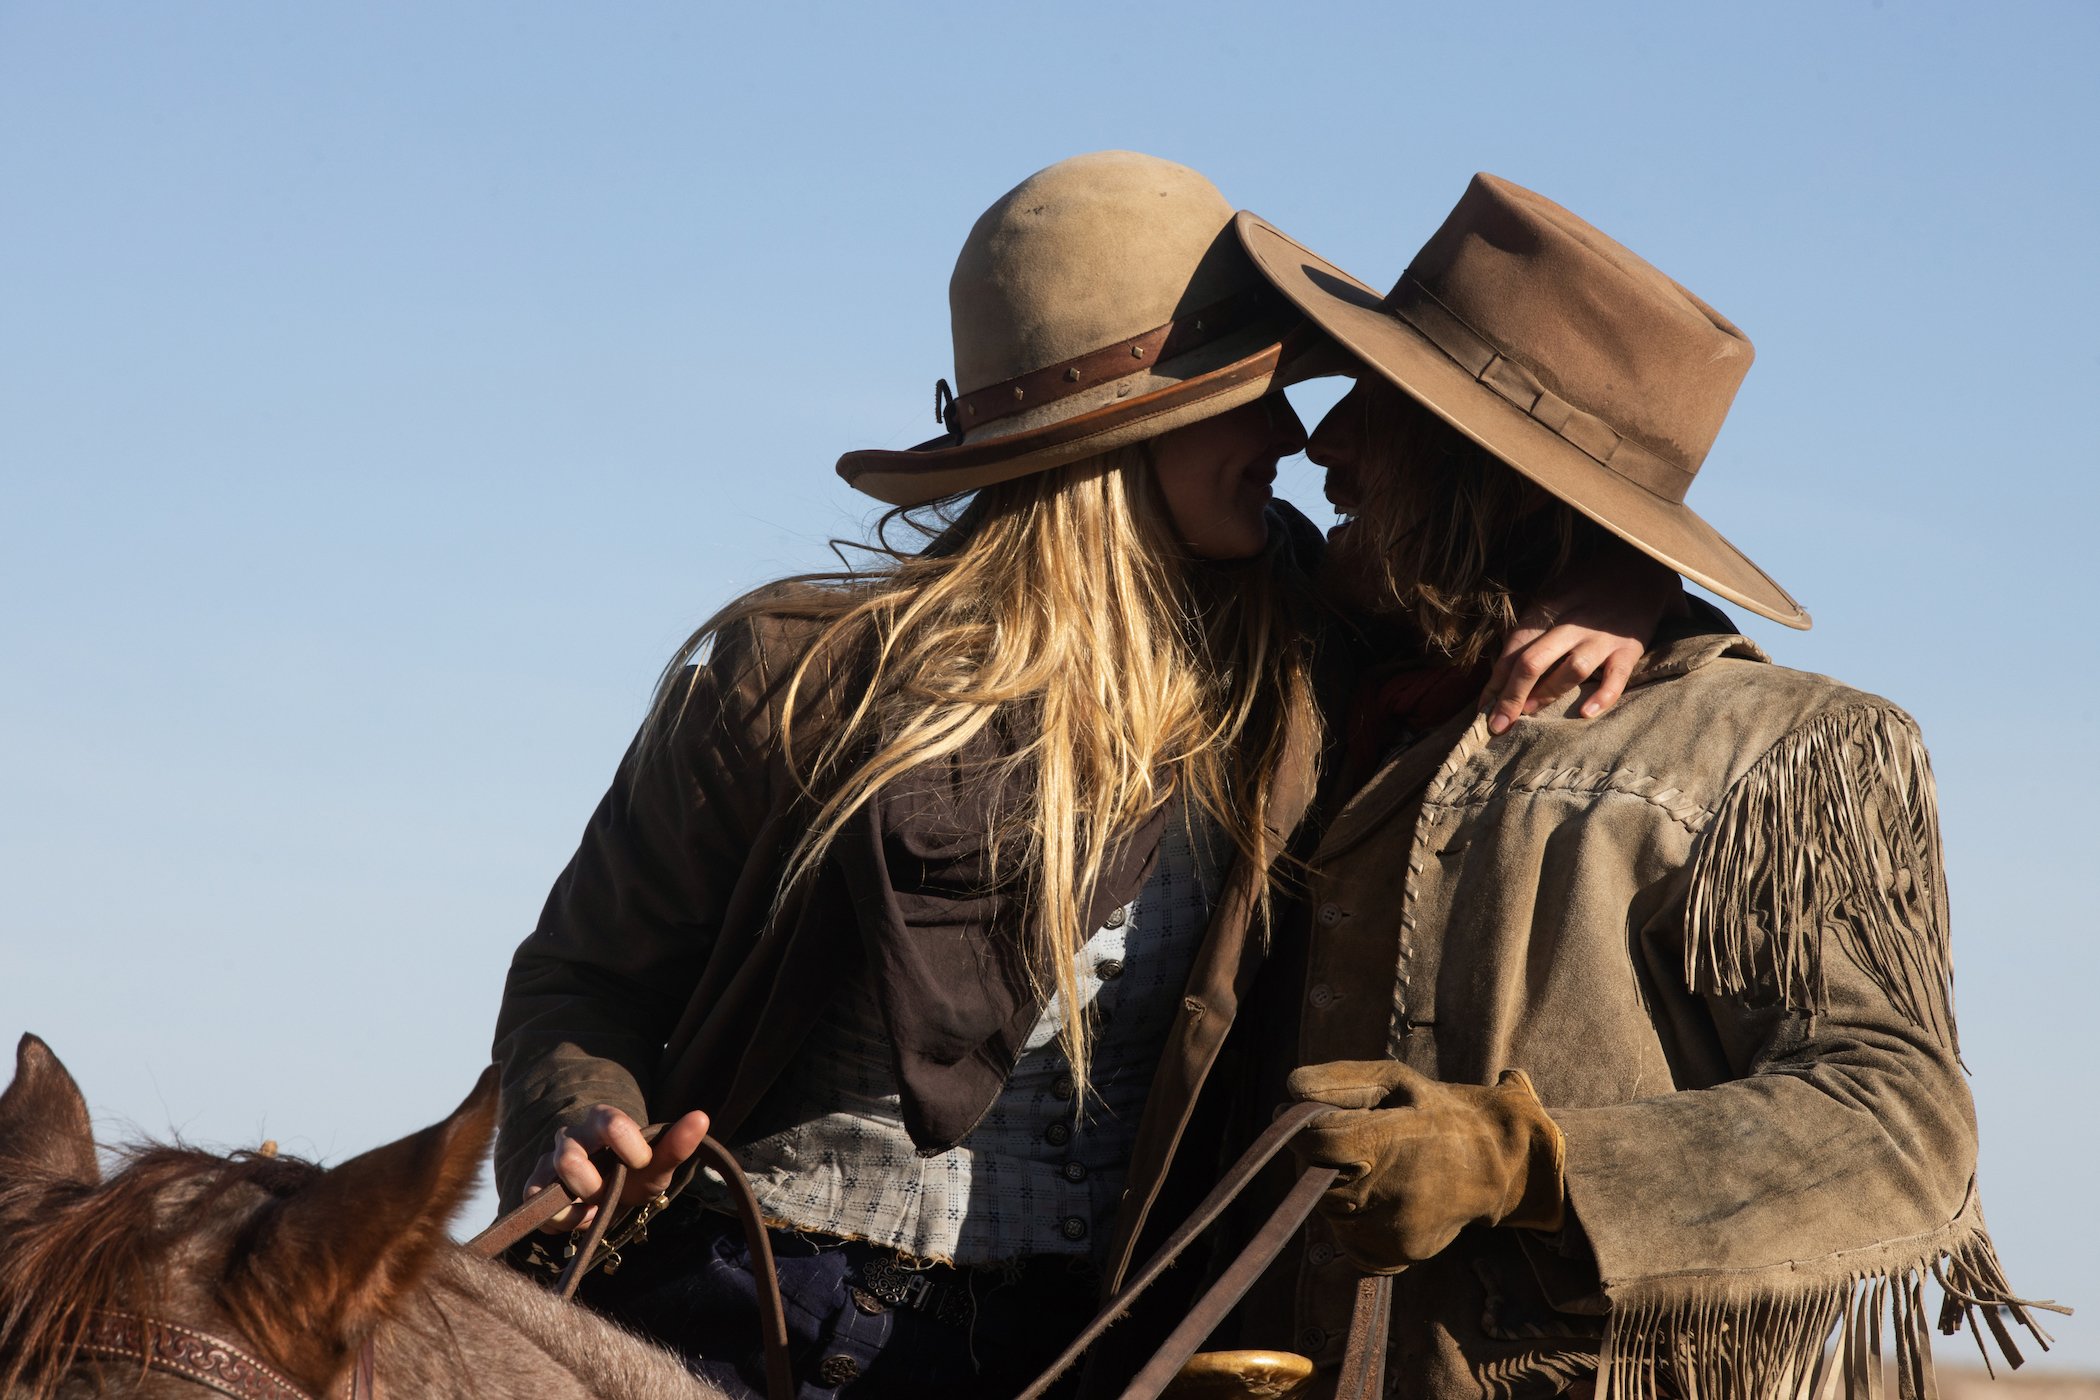 Isabel May as Elsa Dutton and Eric Nelsen as Ennis about to kiss each other while riding horses in '1883'